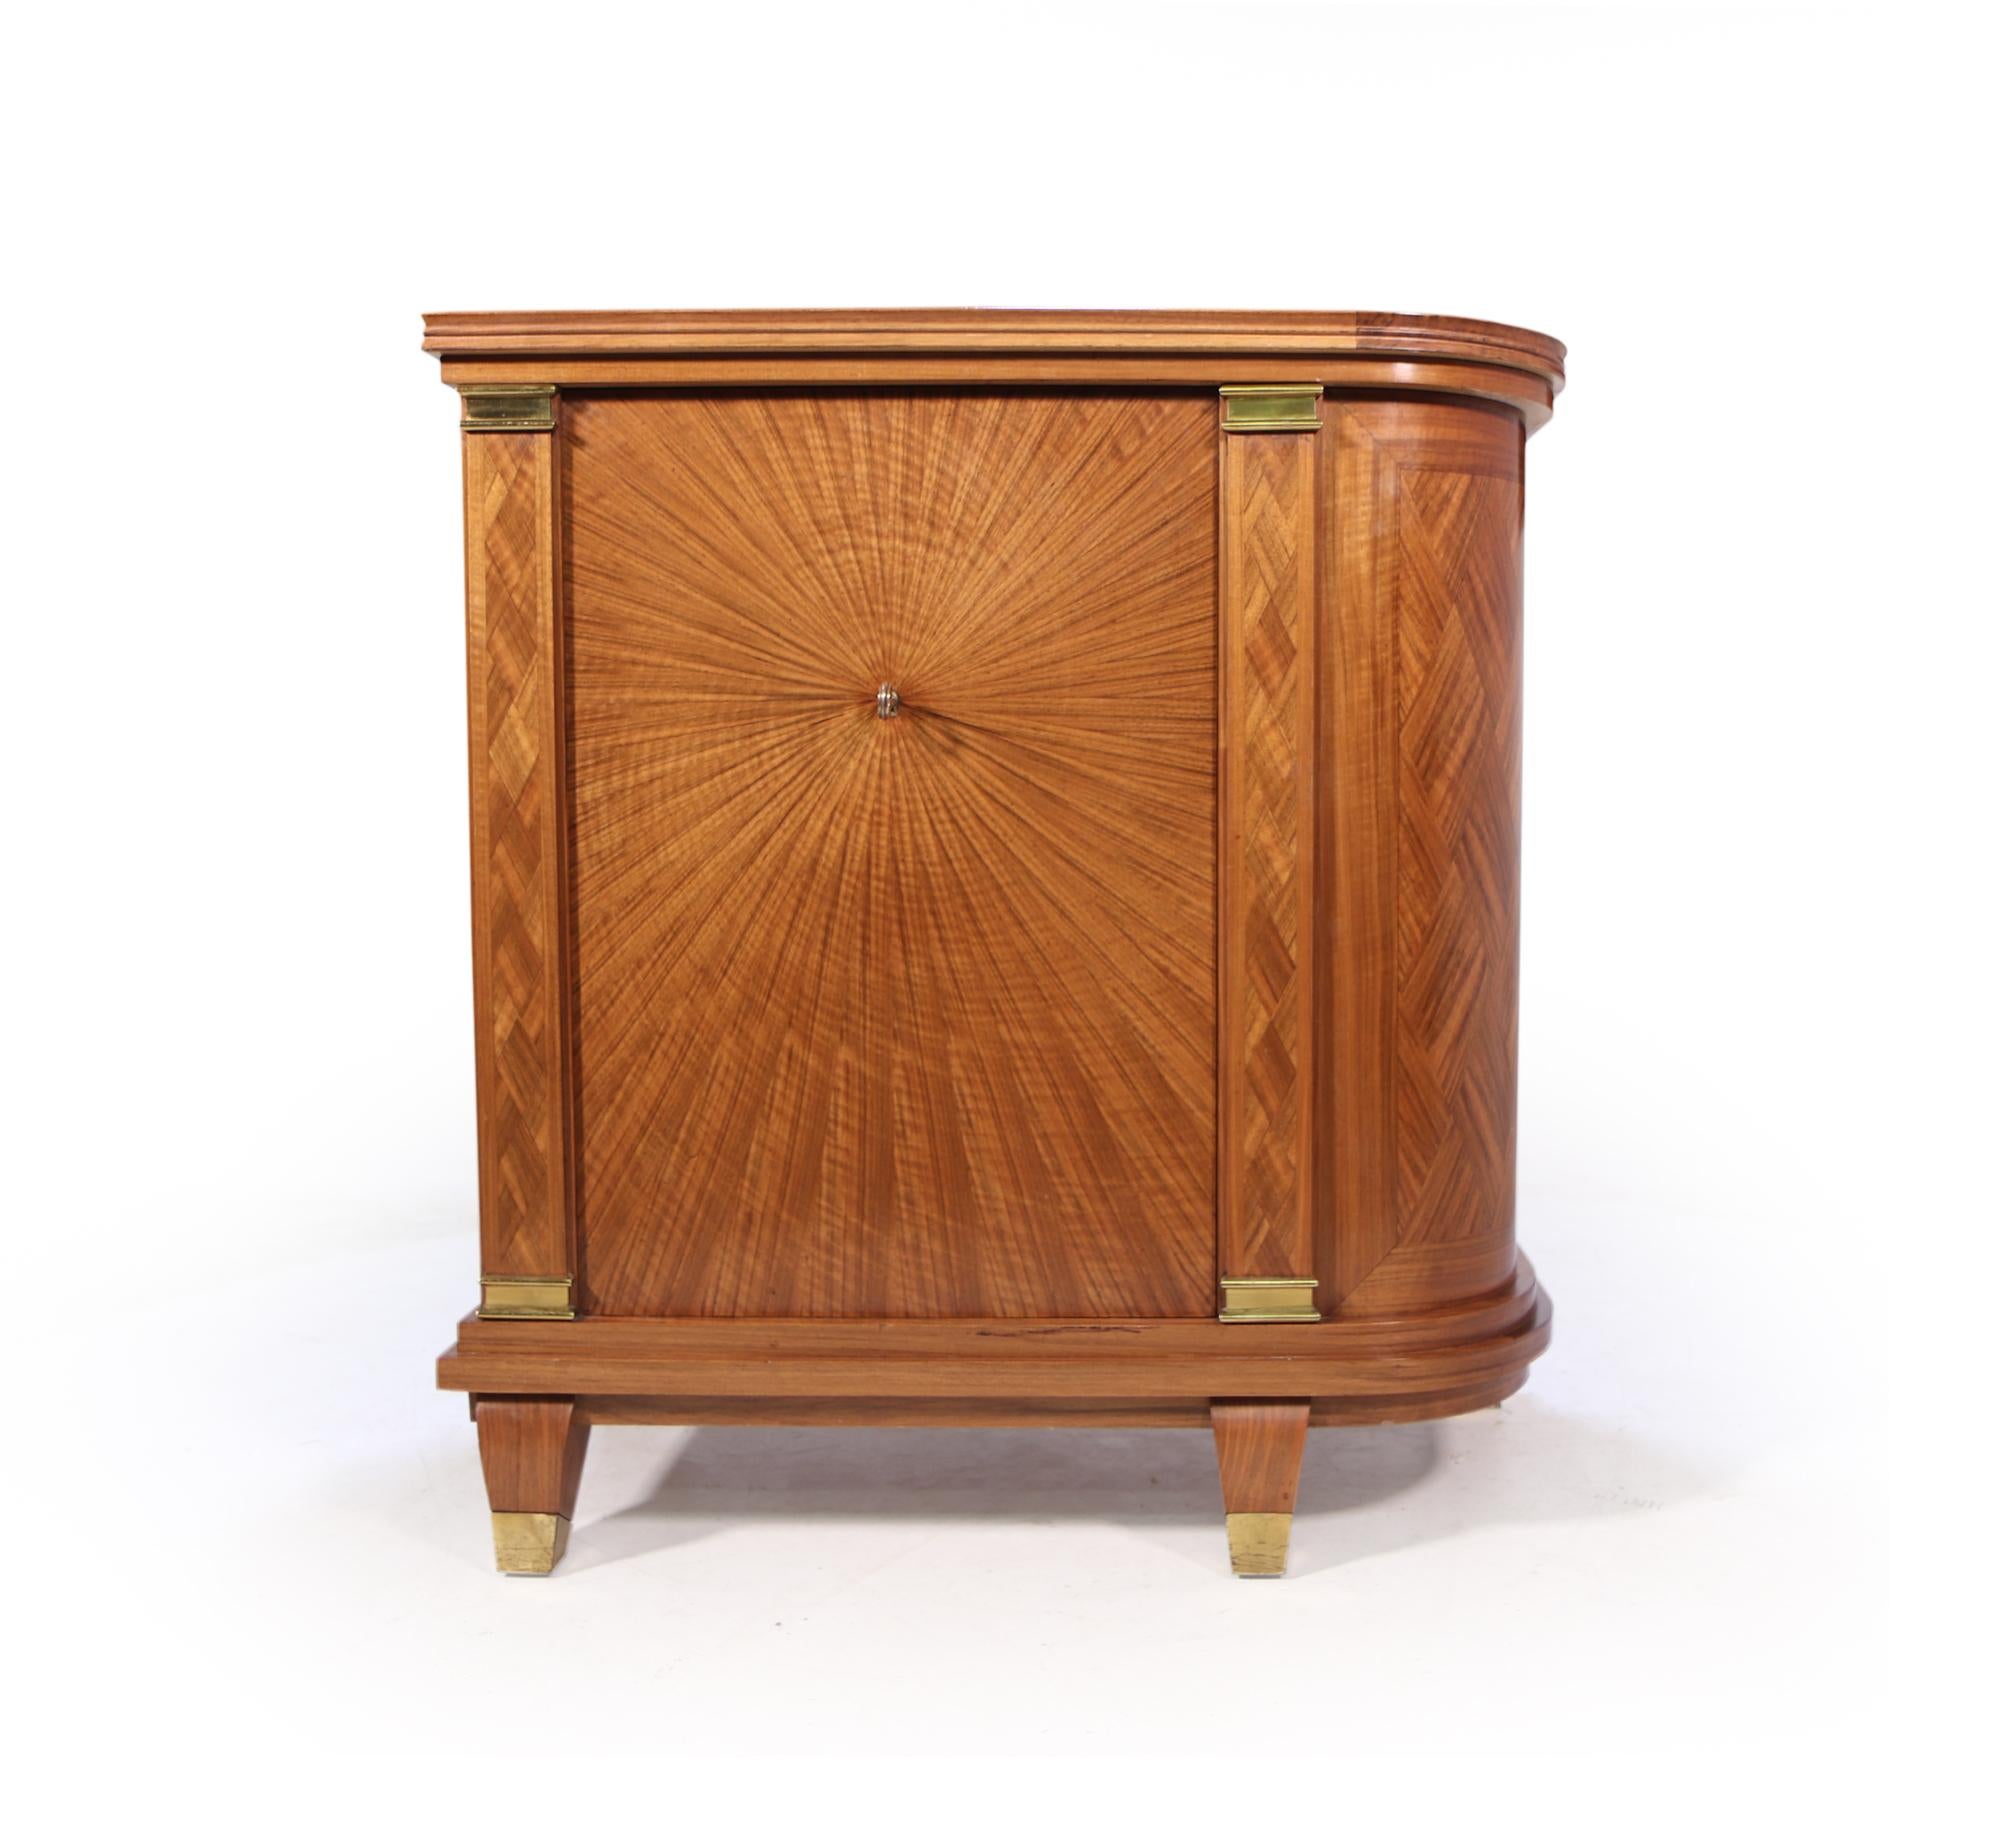 French Art Deco Cocktail Cabinet Walnut Parquetry and Gilt Bronze Fittings